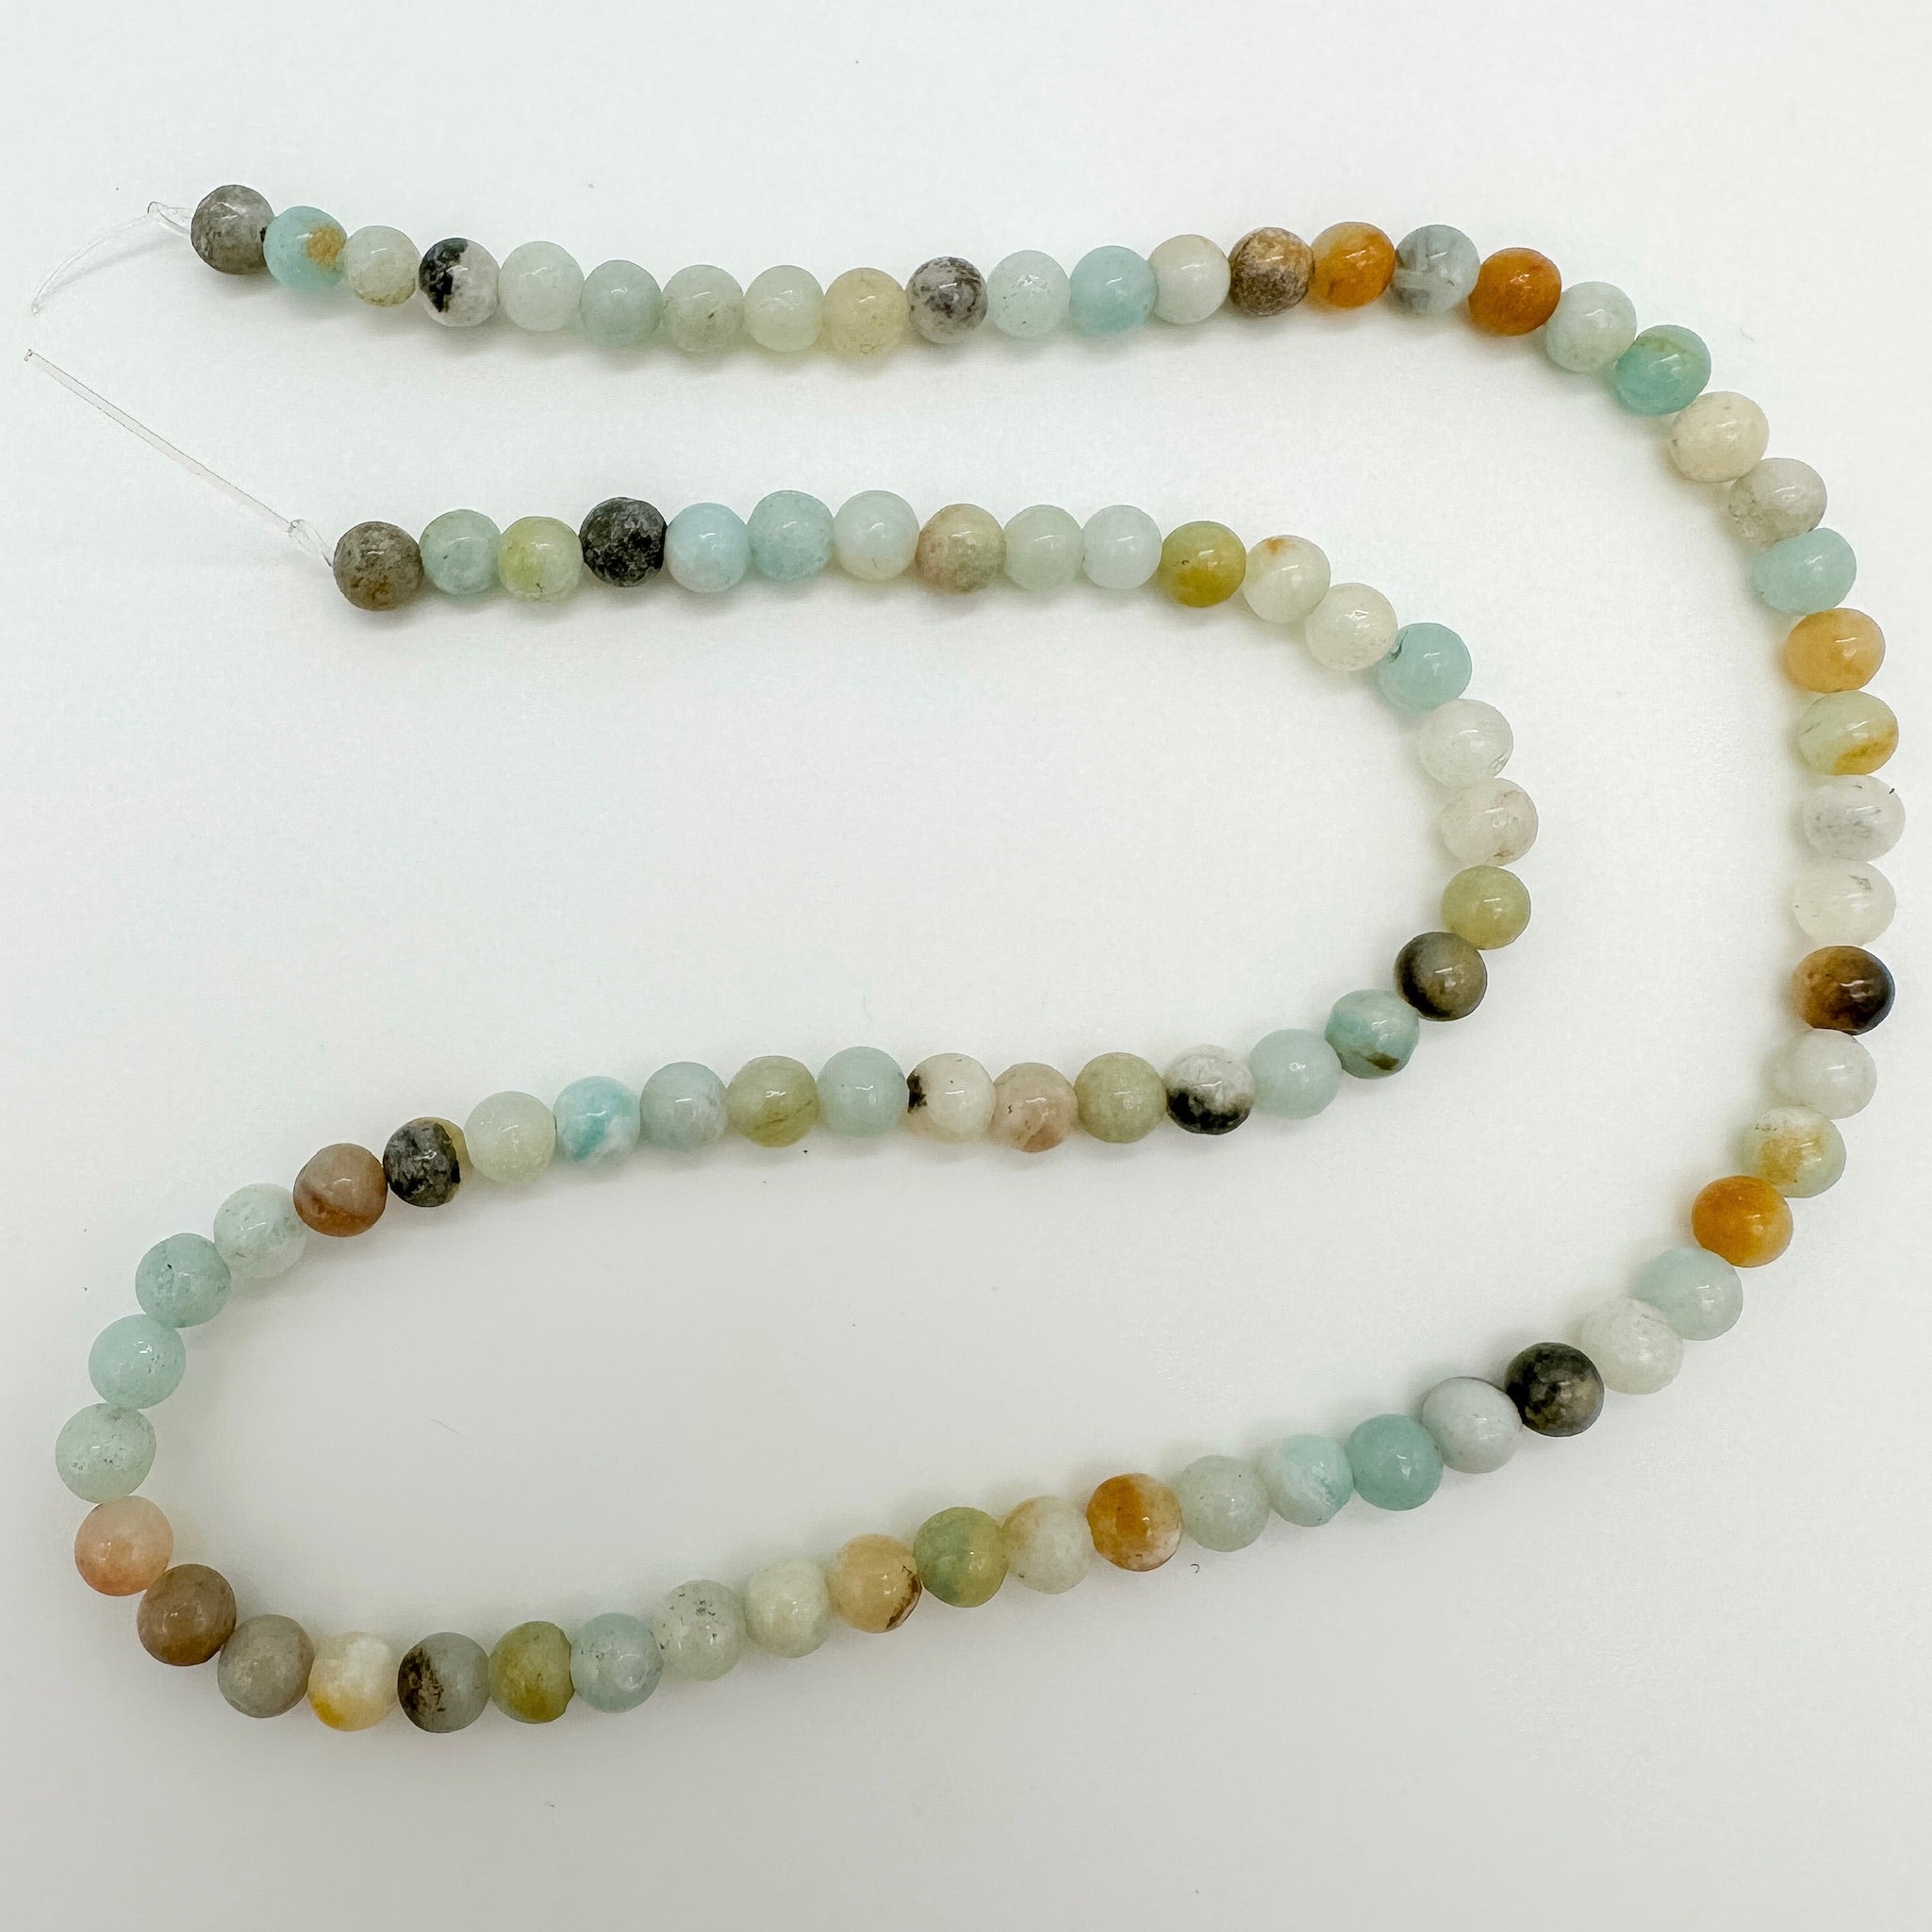 Natural flower amazonite rounded beads for jewelry making, beaded bracelets, jewelry supplies